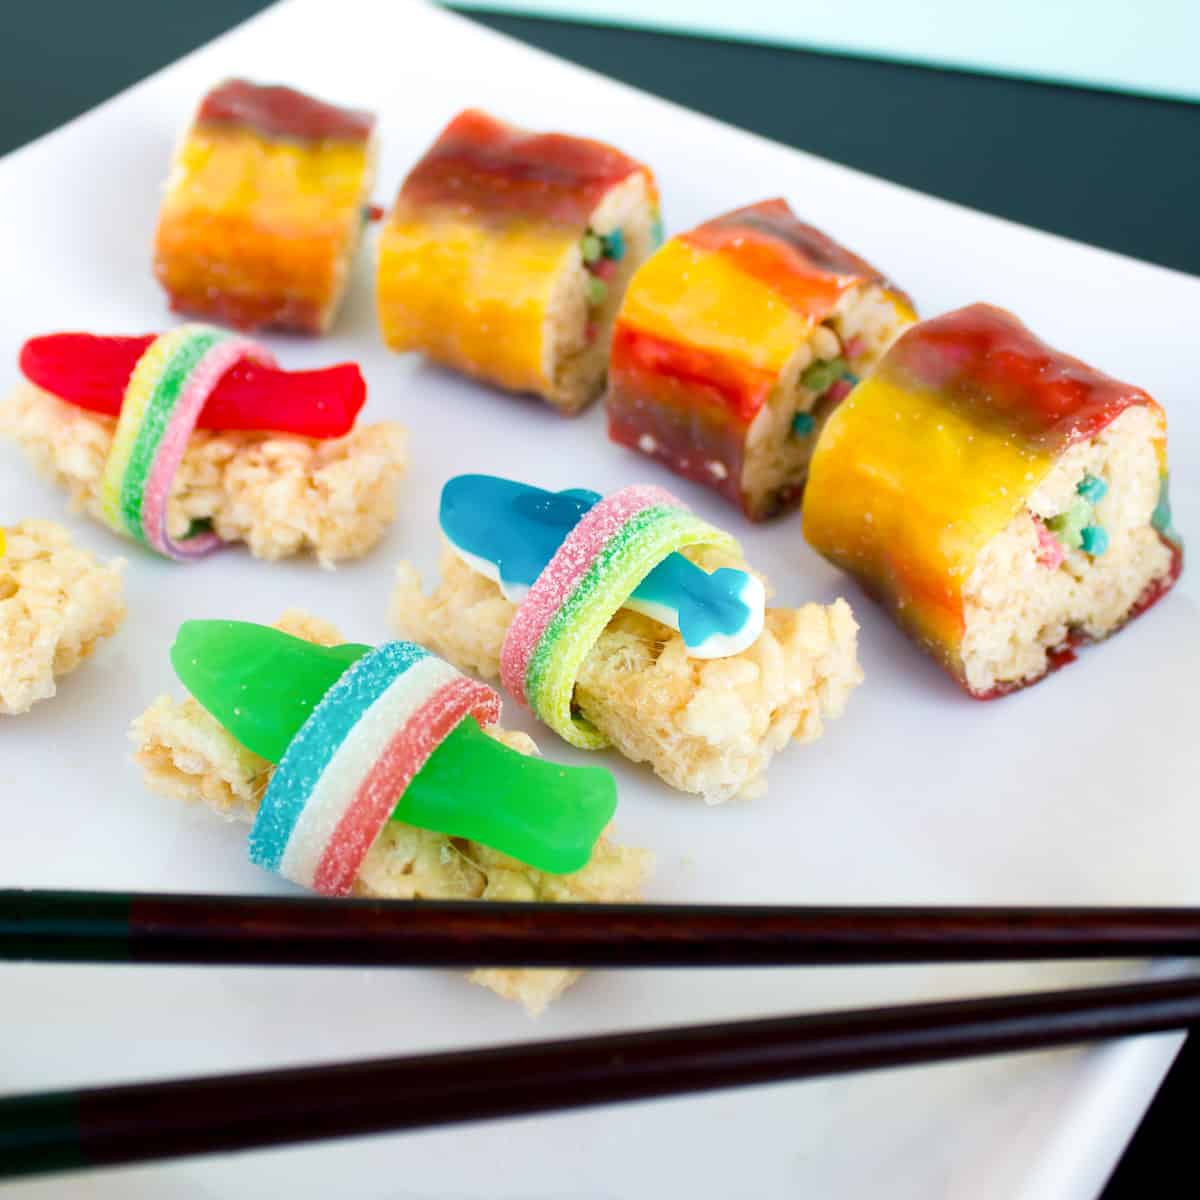 https://www.theblackpeppercorn.com/wp-content/uploads/2012/04/Candy-Sushi-square-5.jpg